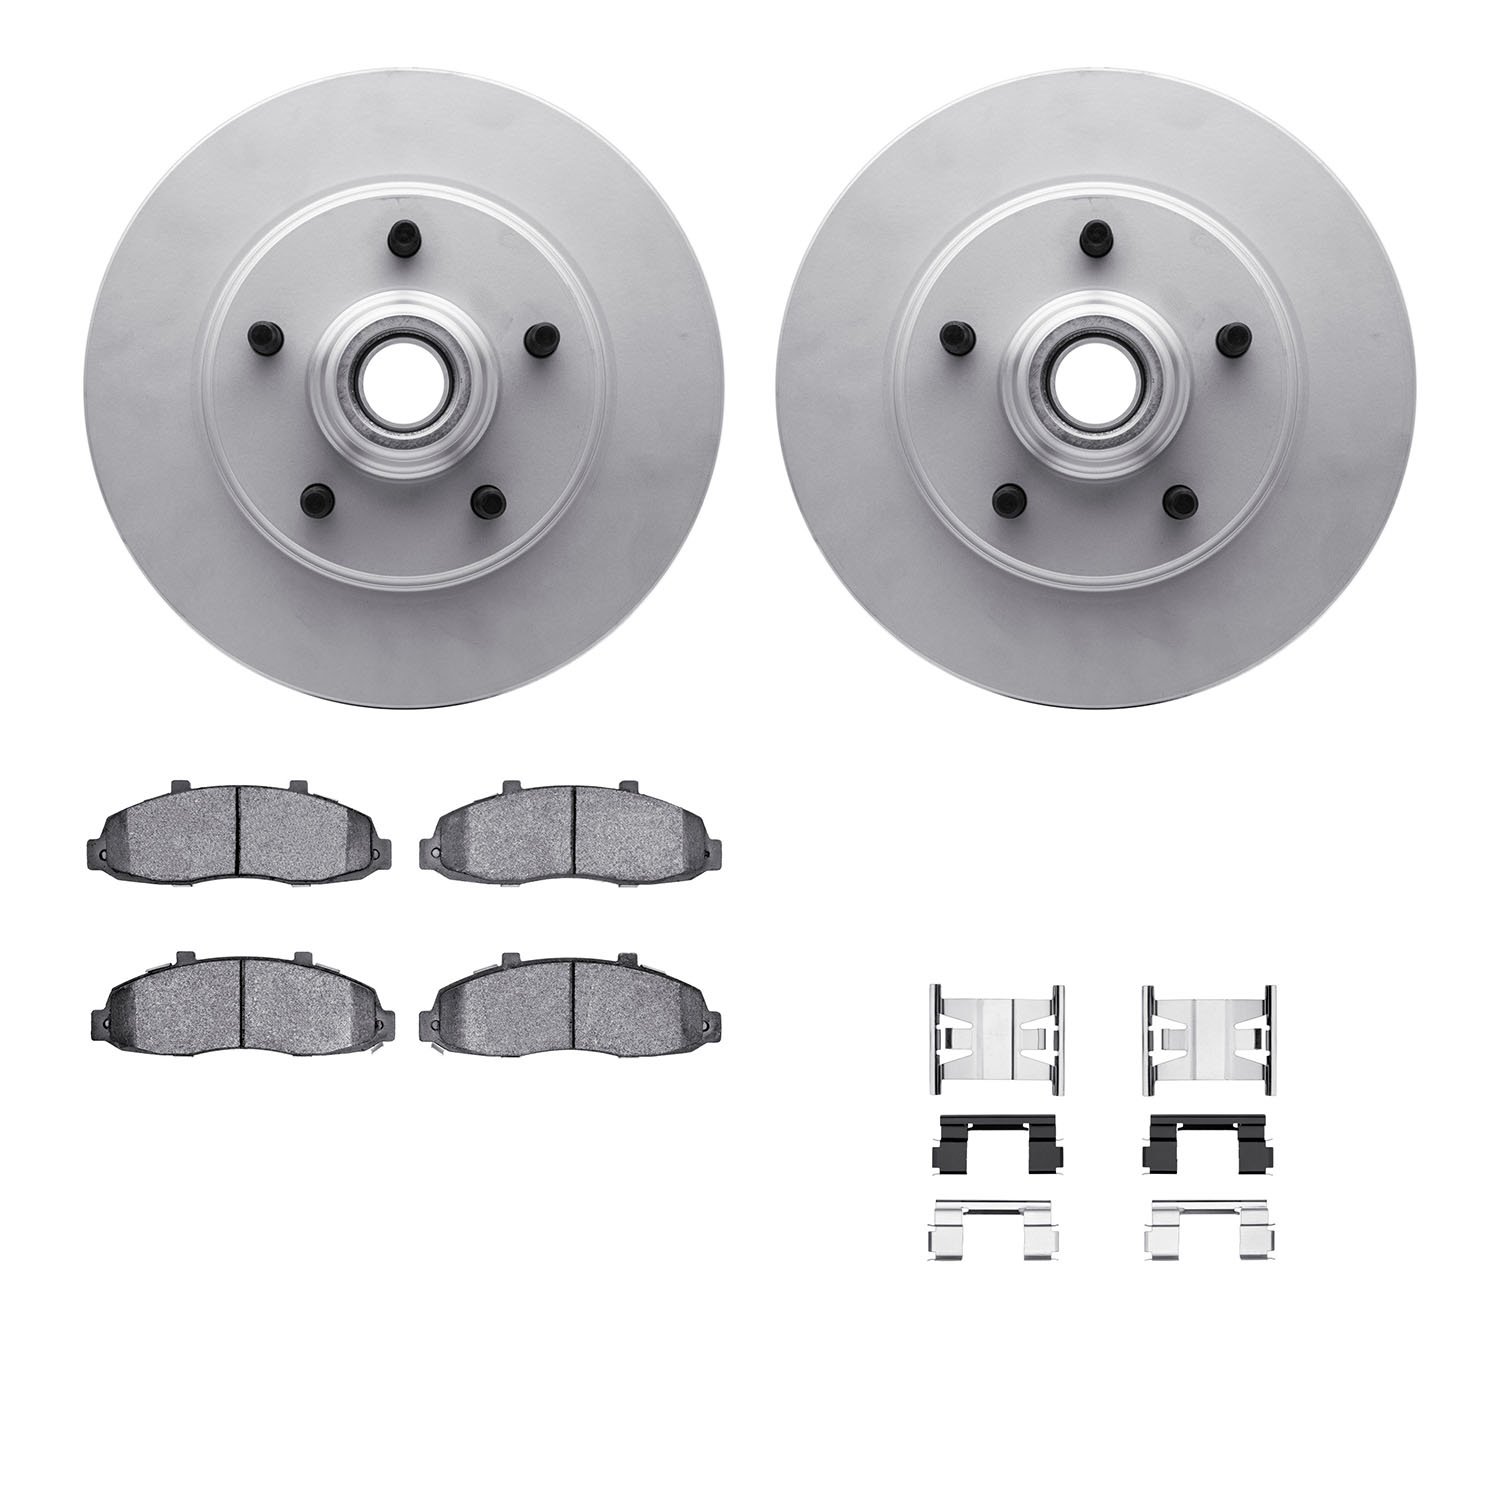 4412-54031 Geospec Brake Rotors with Ultimate-Duty Brake Pads & Hardware, 2000-2004 Ford/Lincoln/Mercury/Mazda, Position: Front